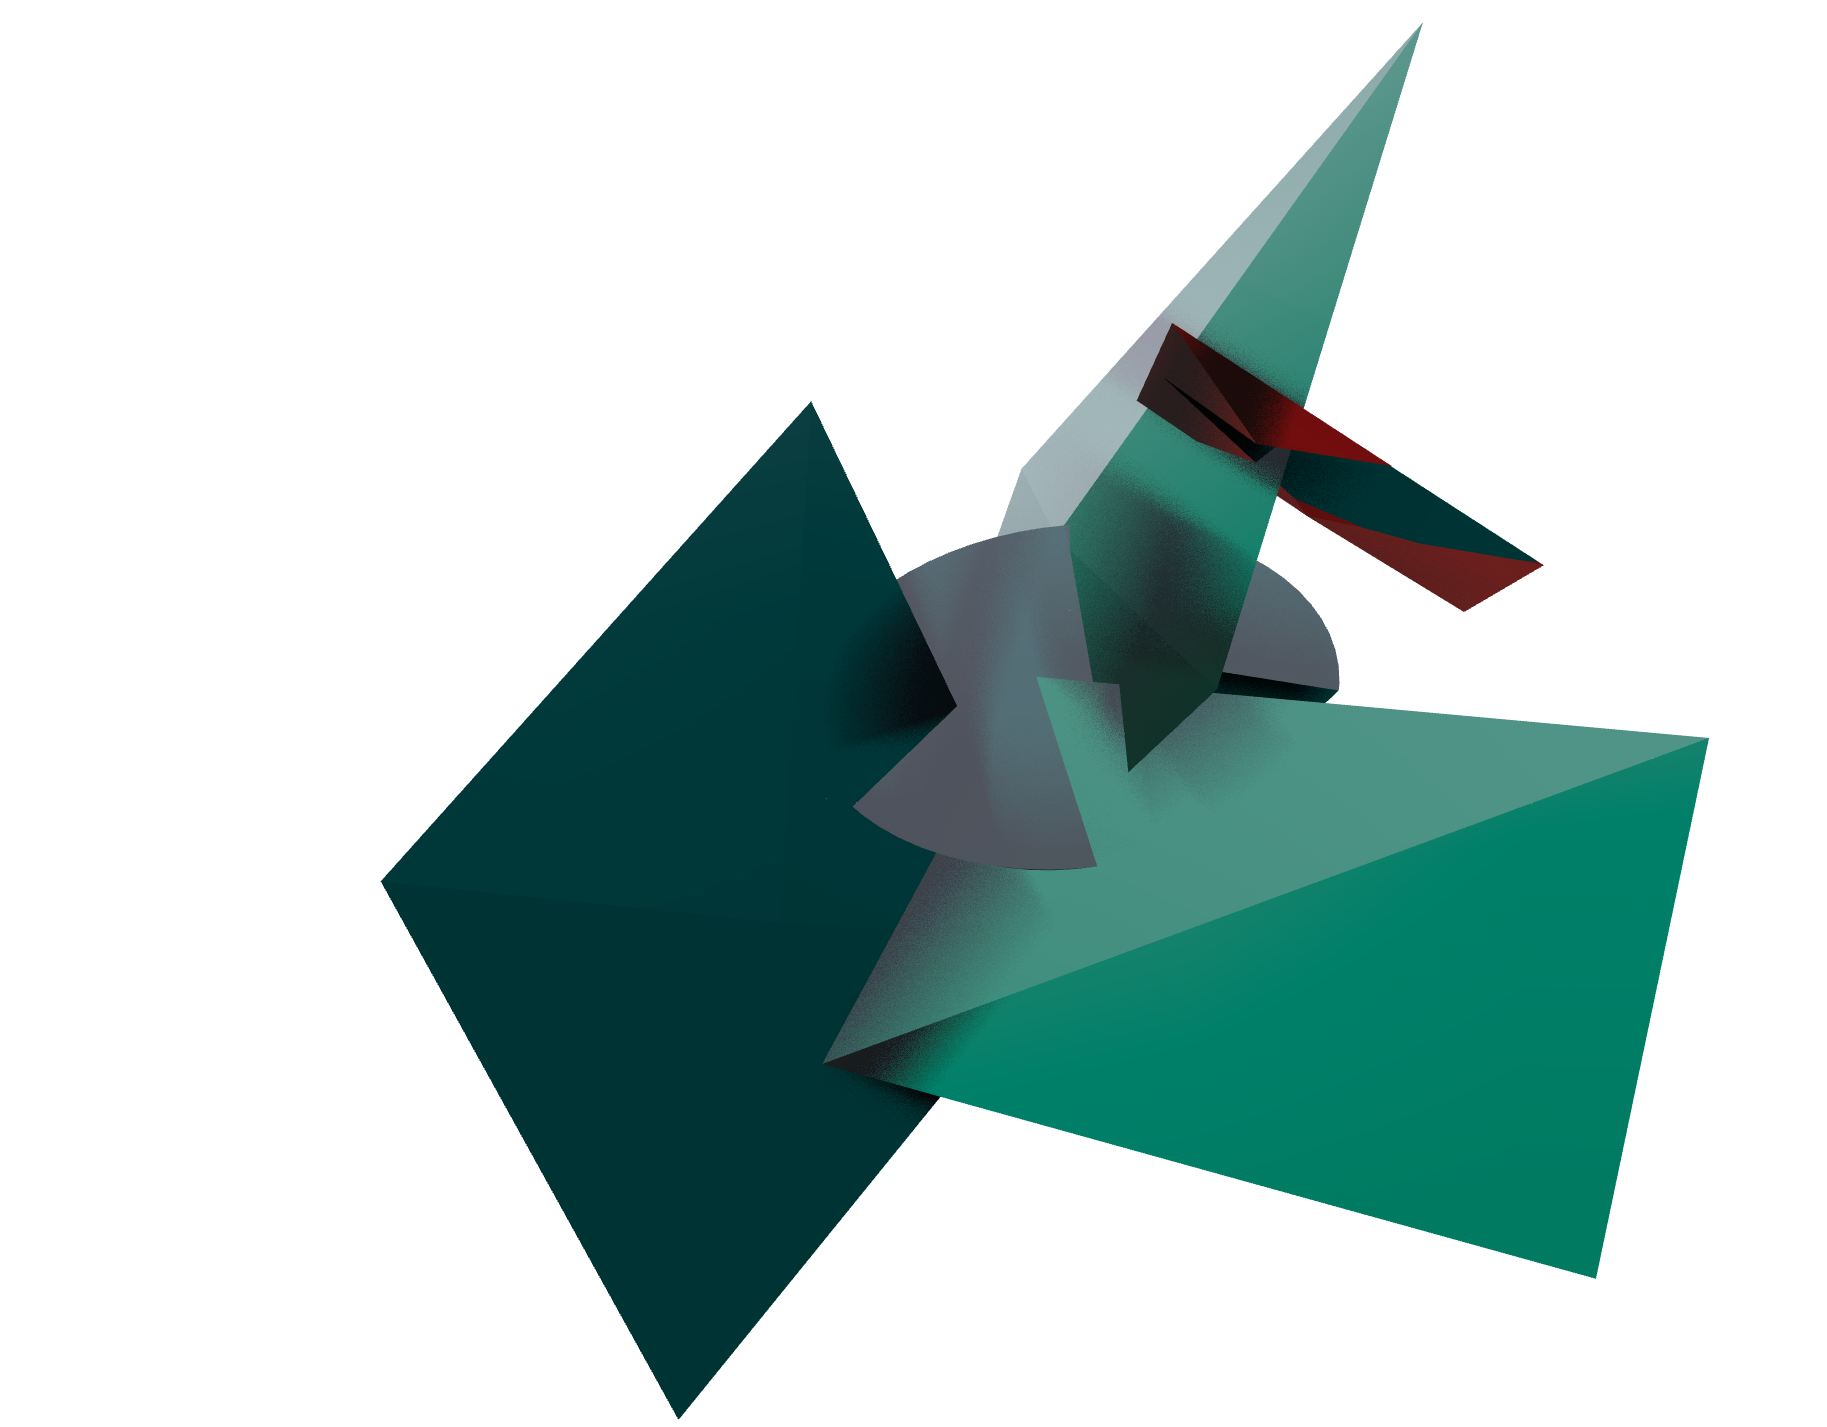 Futuristic Green Abstract 3D Shapes